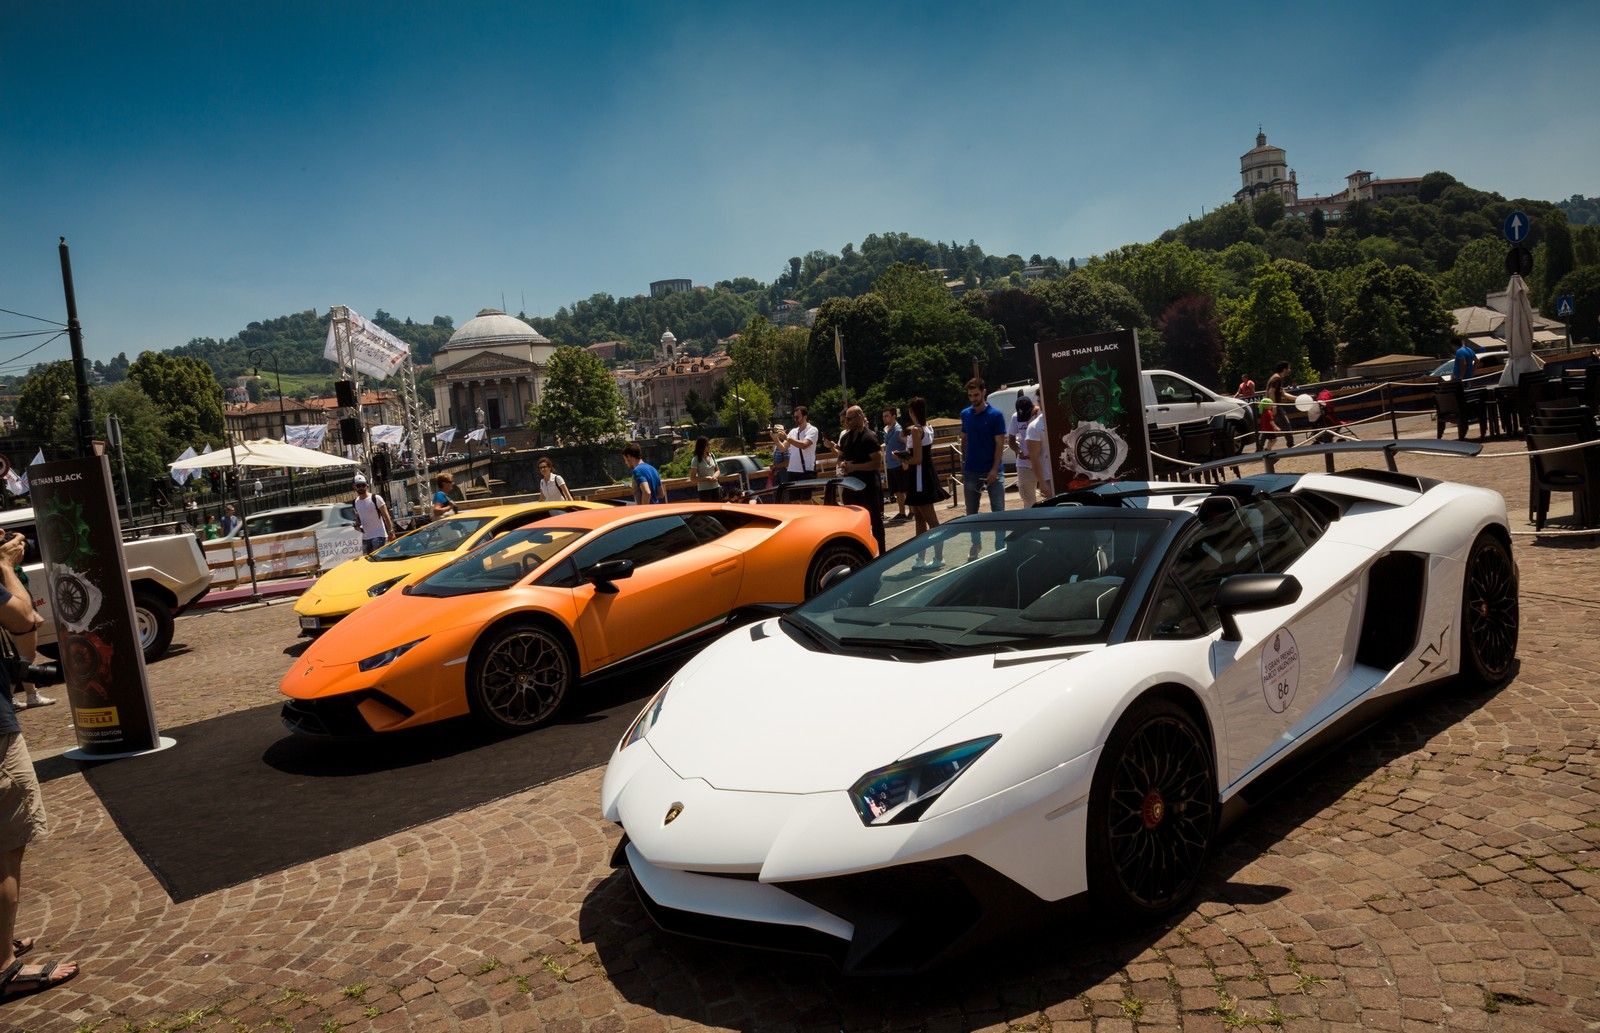 The Motor Valley to participate in the Turin Motor Show.